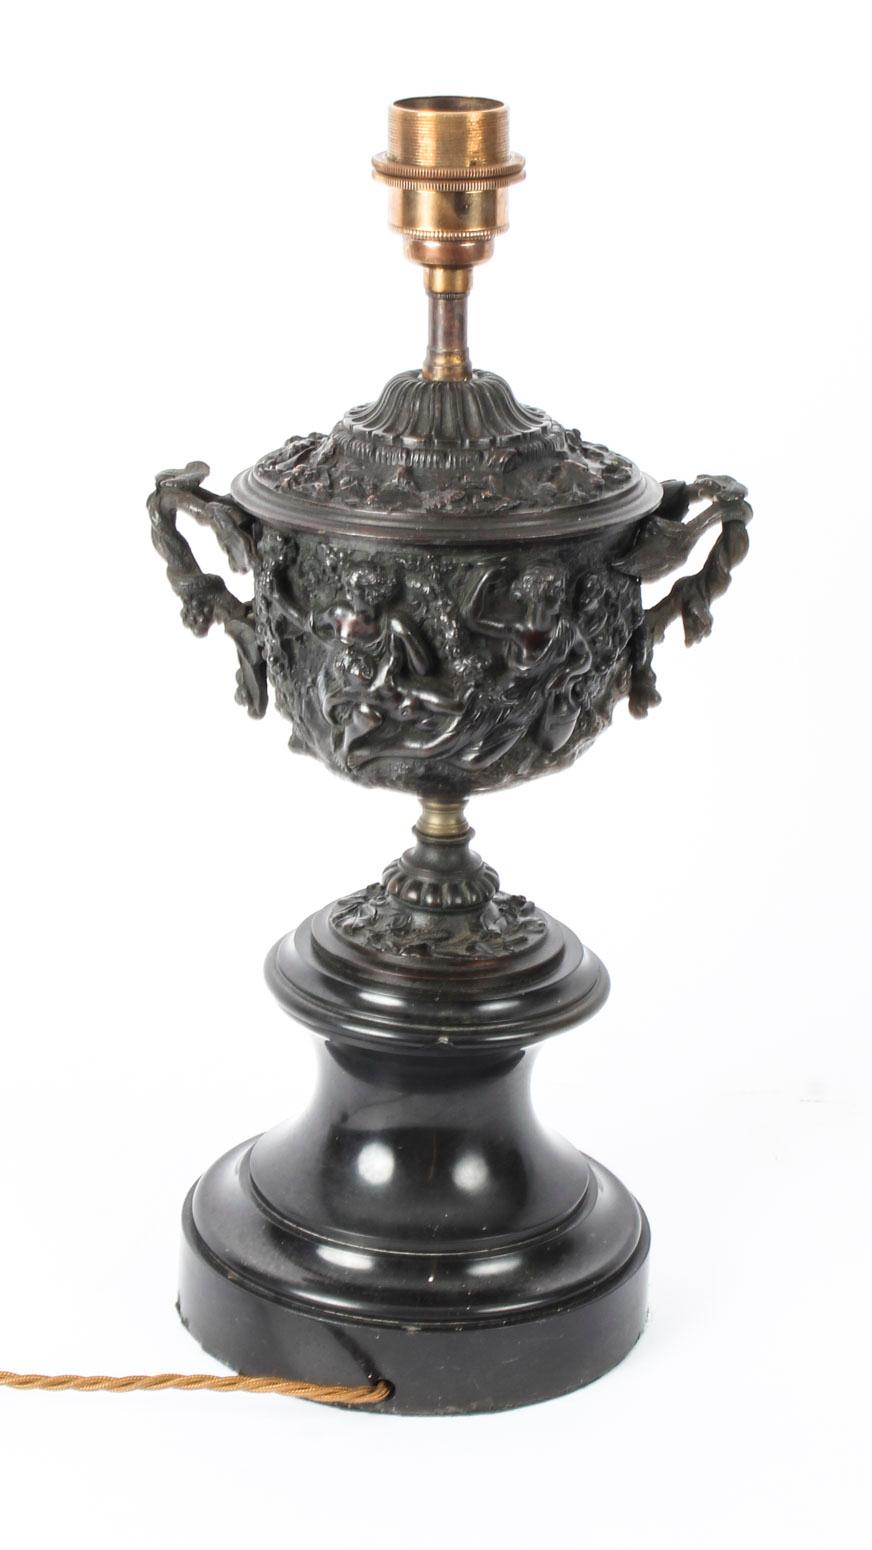 A superb antique pair of Grand Tour bronze twin handled urns, converted to lamps, circa 1870 in date.

This striking pair of twin handled bronze urns have decorative relief decoration with classical figures, are mounted on marble socles, and have